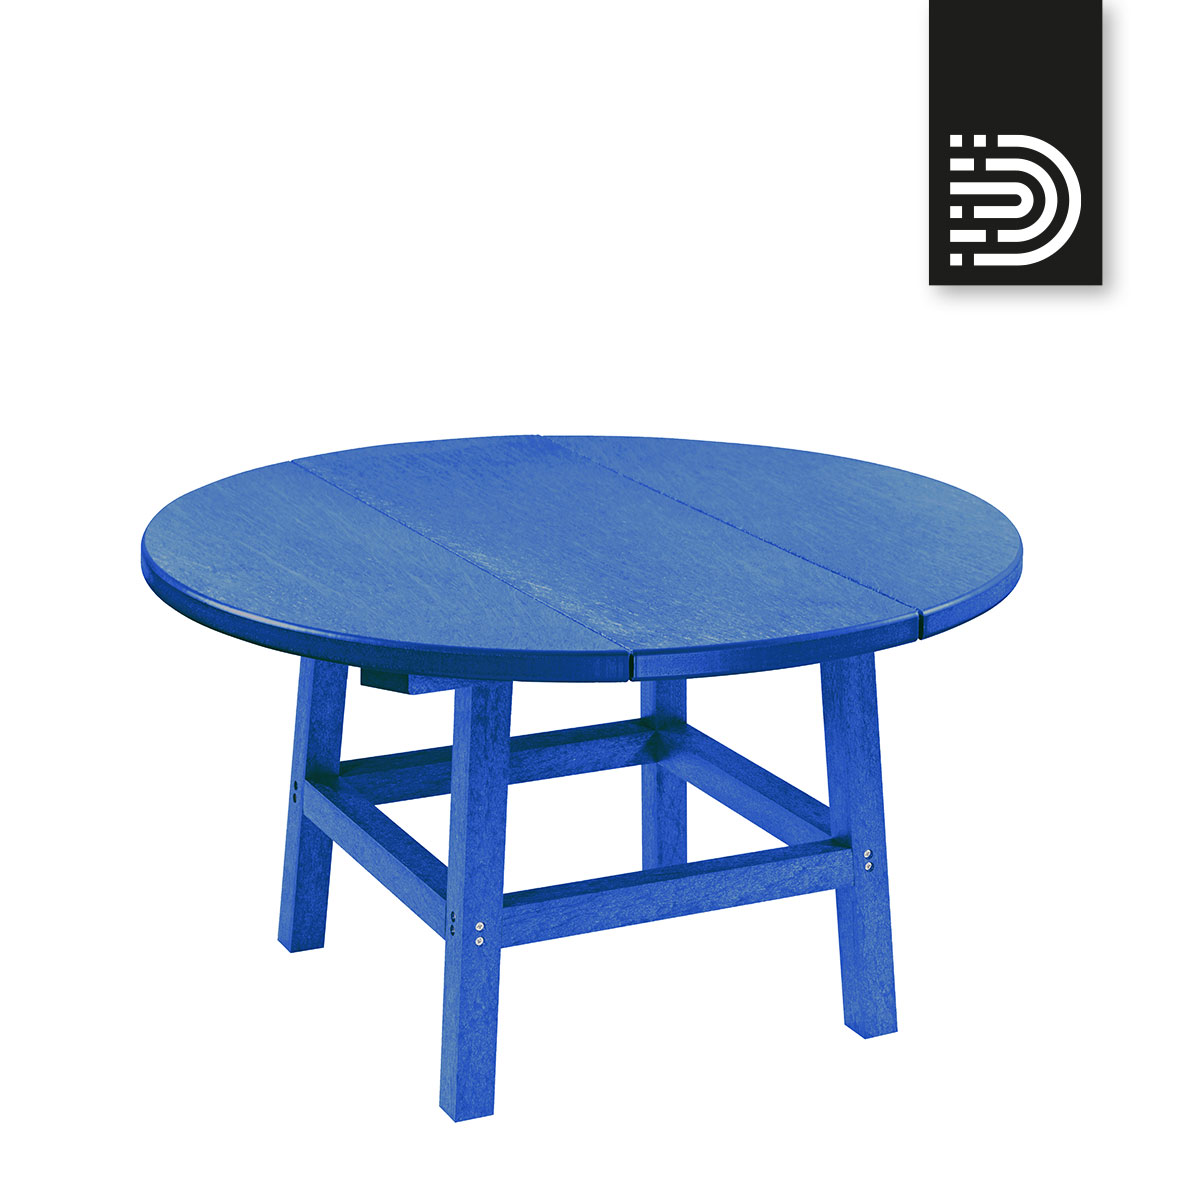 Cocktail Table in blue 03- TB01+TT03/02